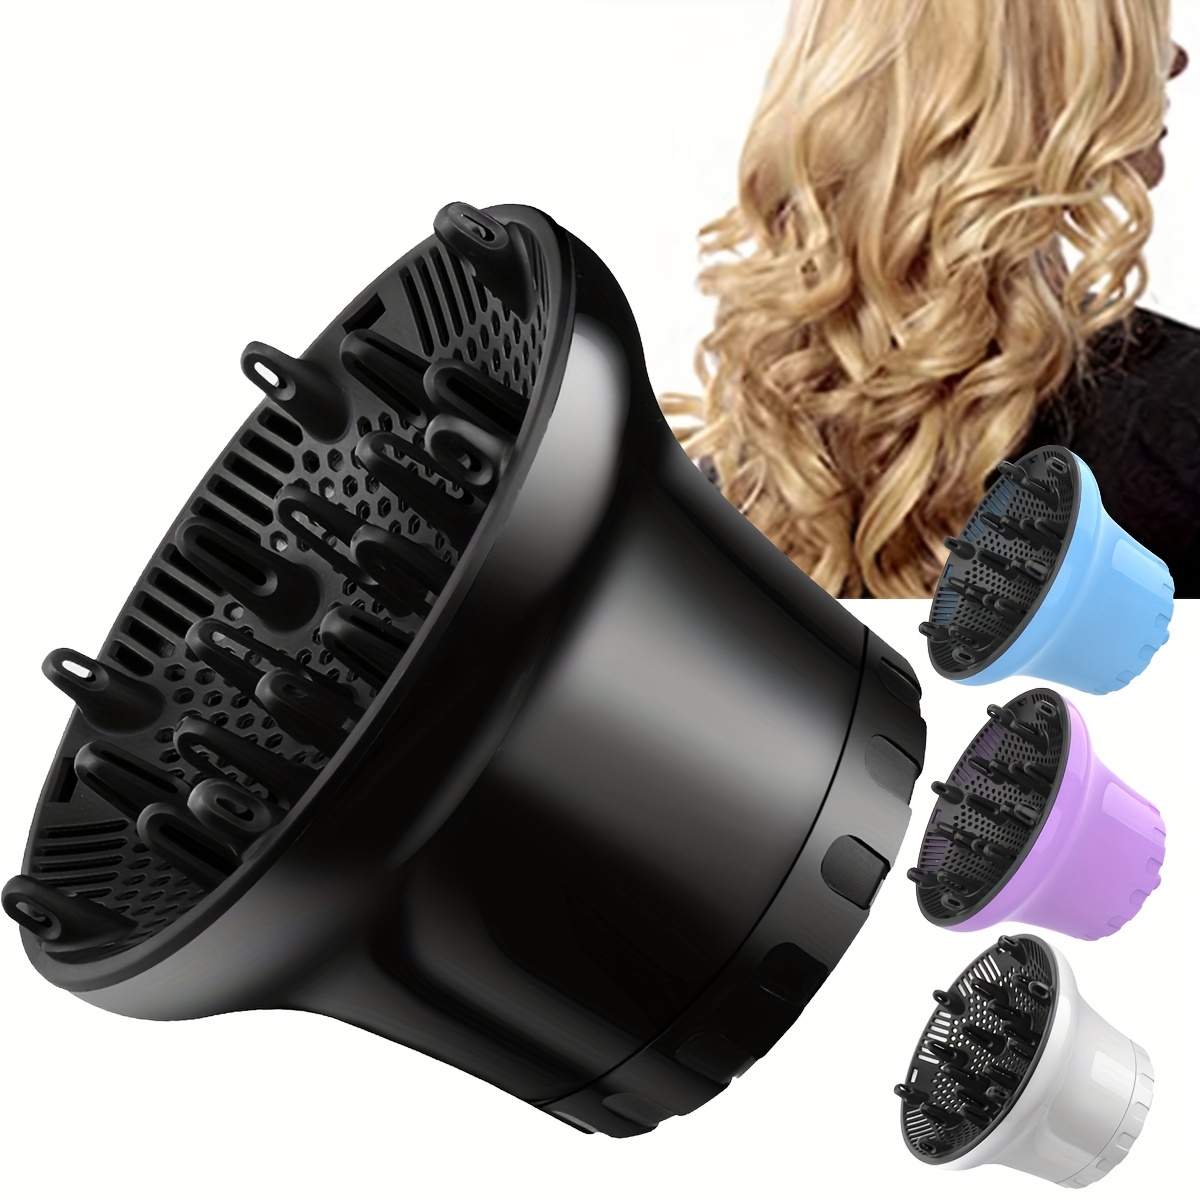 

Adjustable Hair Diffuser For Curly Hair Suitable For 1.45 Inch To 3.14 Inch Blow Dryer, Diffuser Attachment Universal For Fine Thick Natural Wave And Frizzy Hair Professional Salon Tool